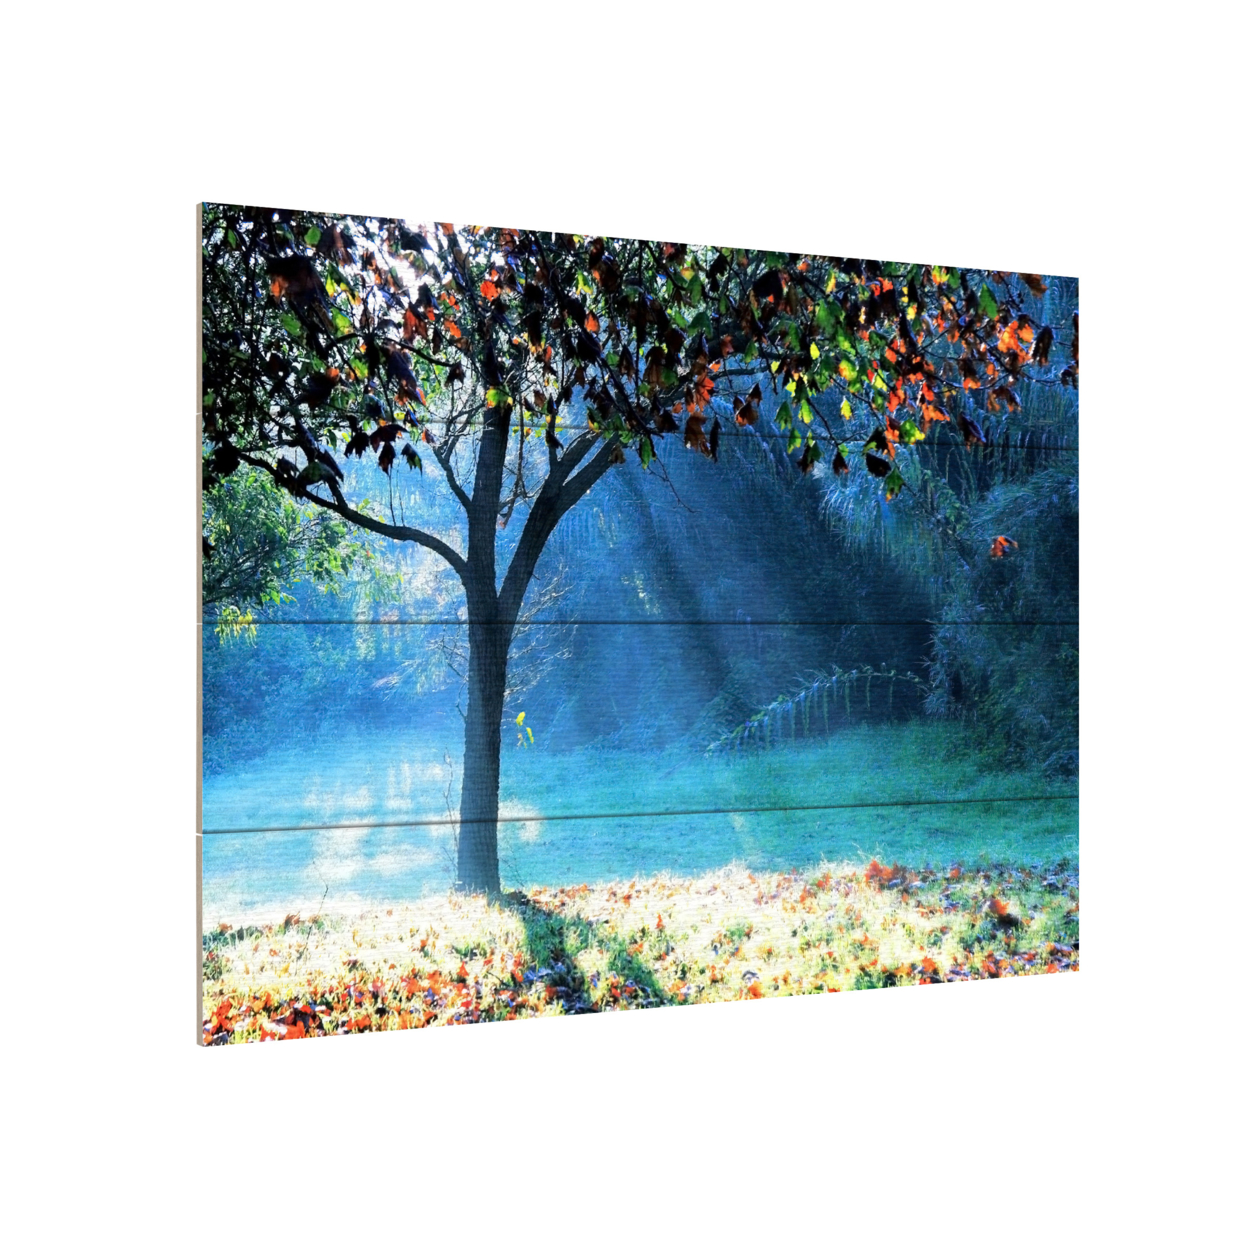 Wall Art 12 X 16 Inches Titled Rays Of Hope Ready To Hang Printed On Wooden Planks